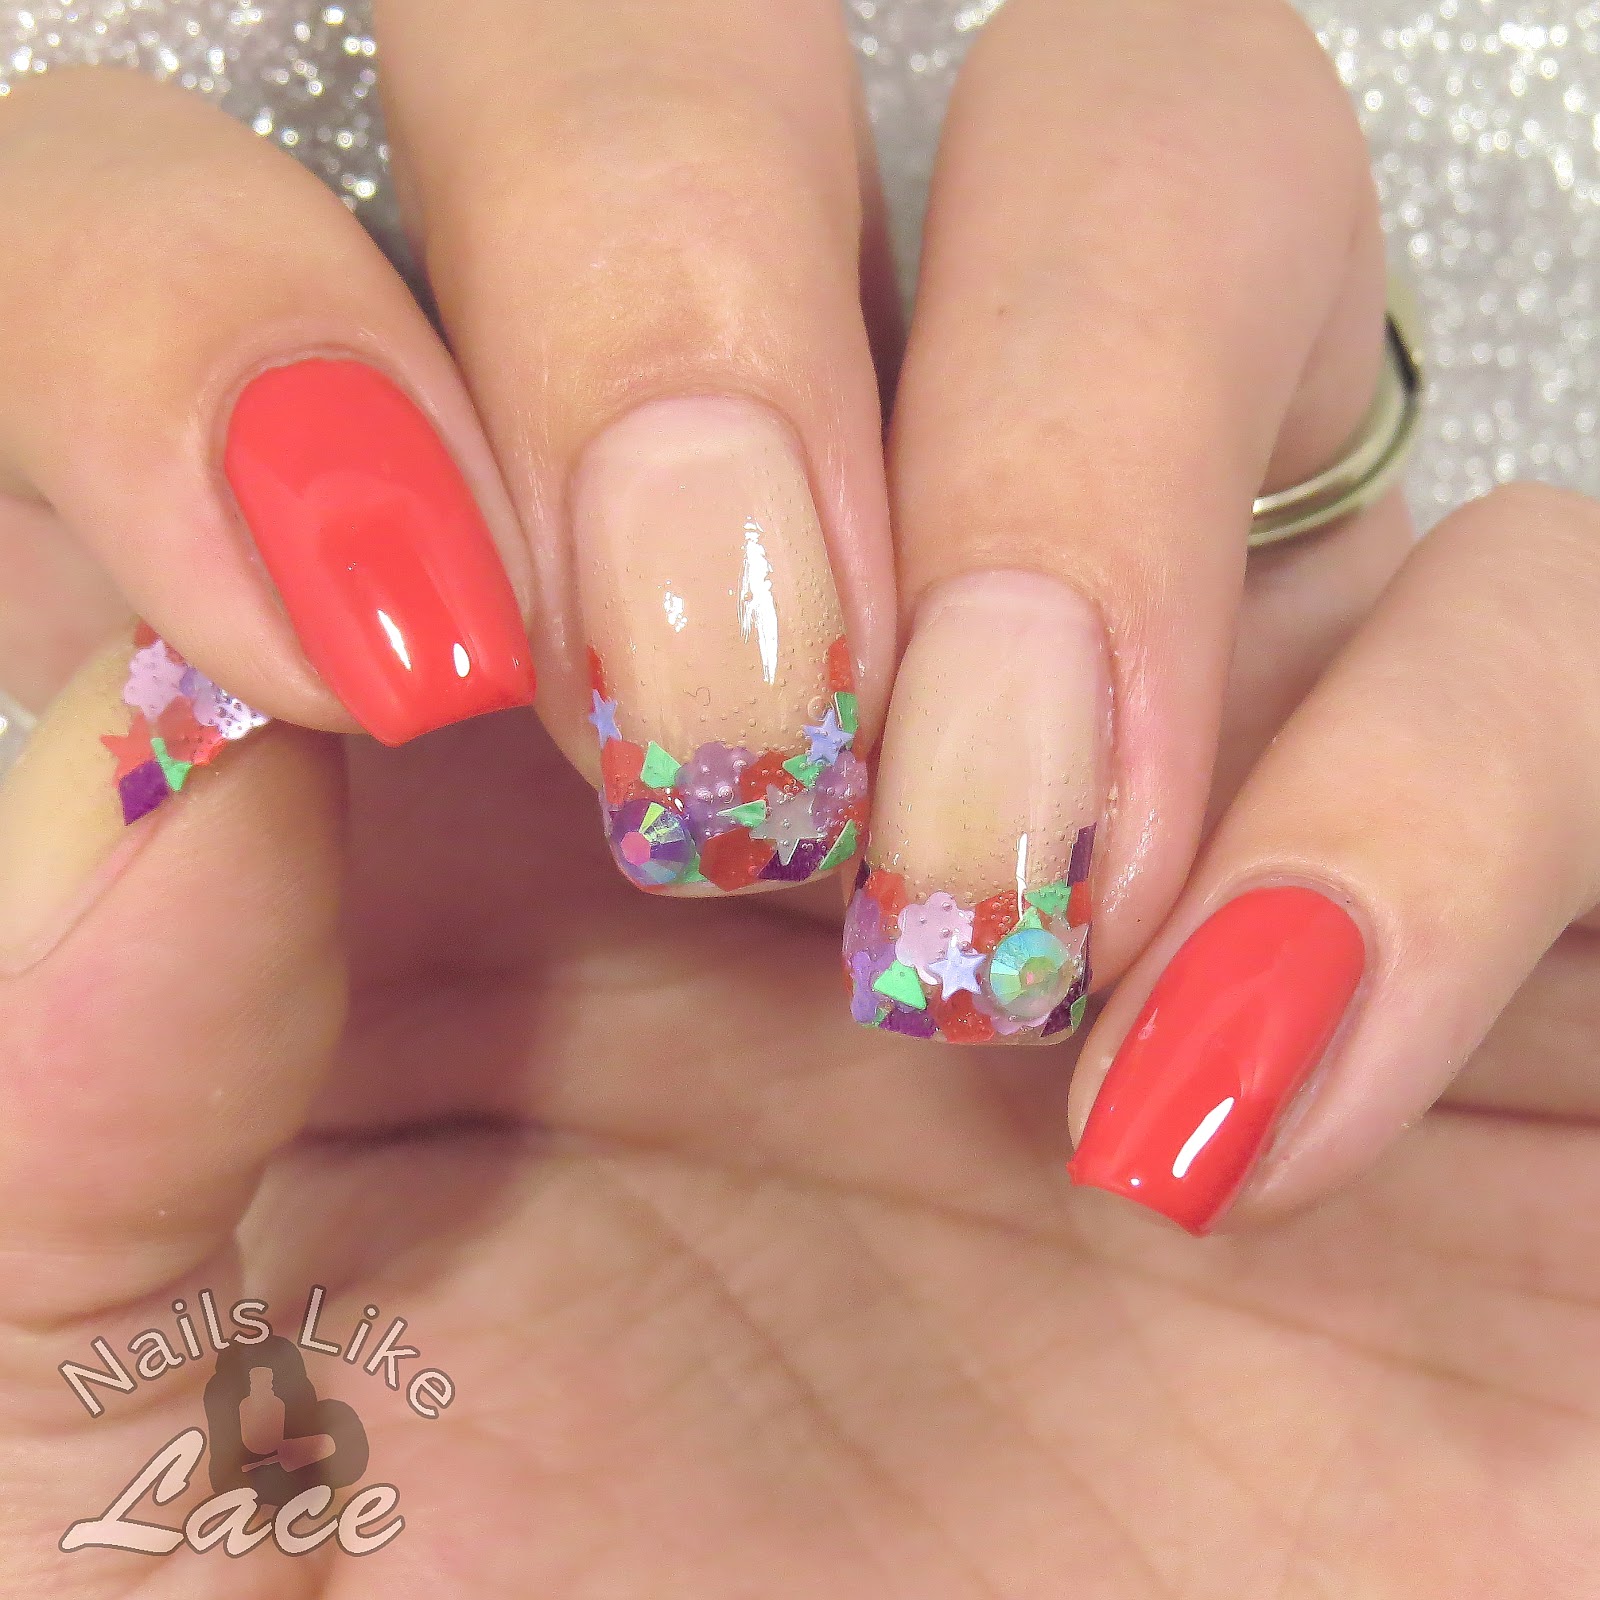 NailsLikeLace: A Weekly Dose of Rainbows: French Tips